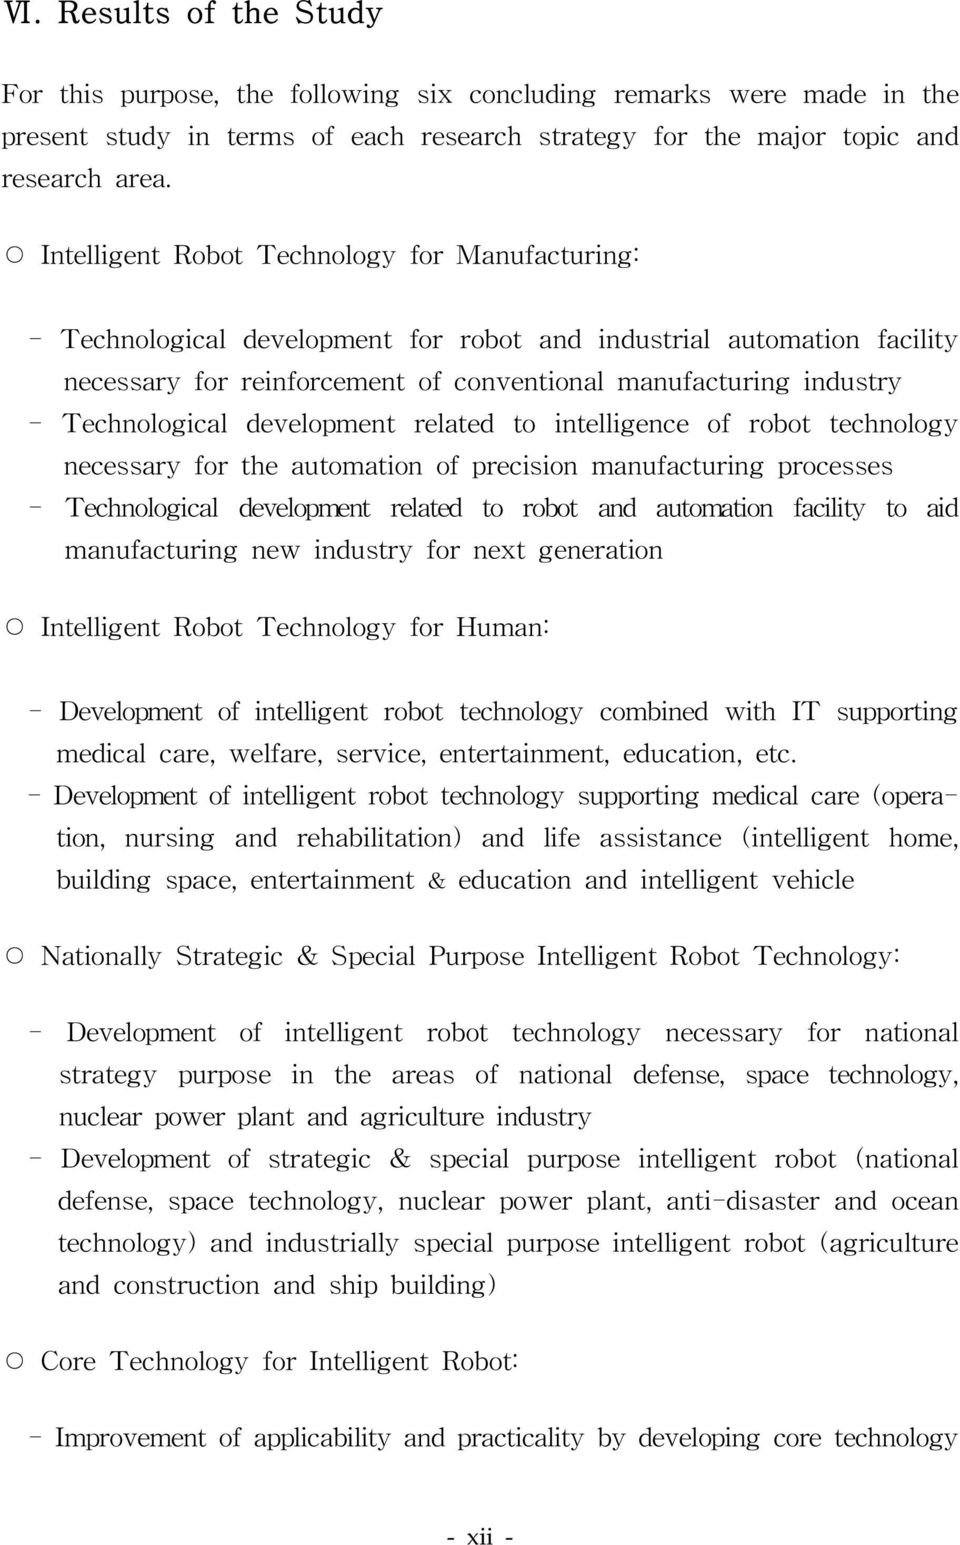 Technological development related to intelligence of robot technology necessary for the automation of precis ion manufacturing proces s es - Technological development related to robot and automation